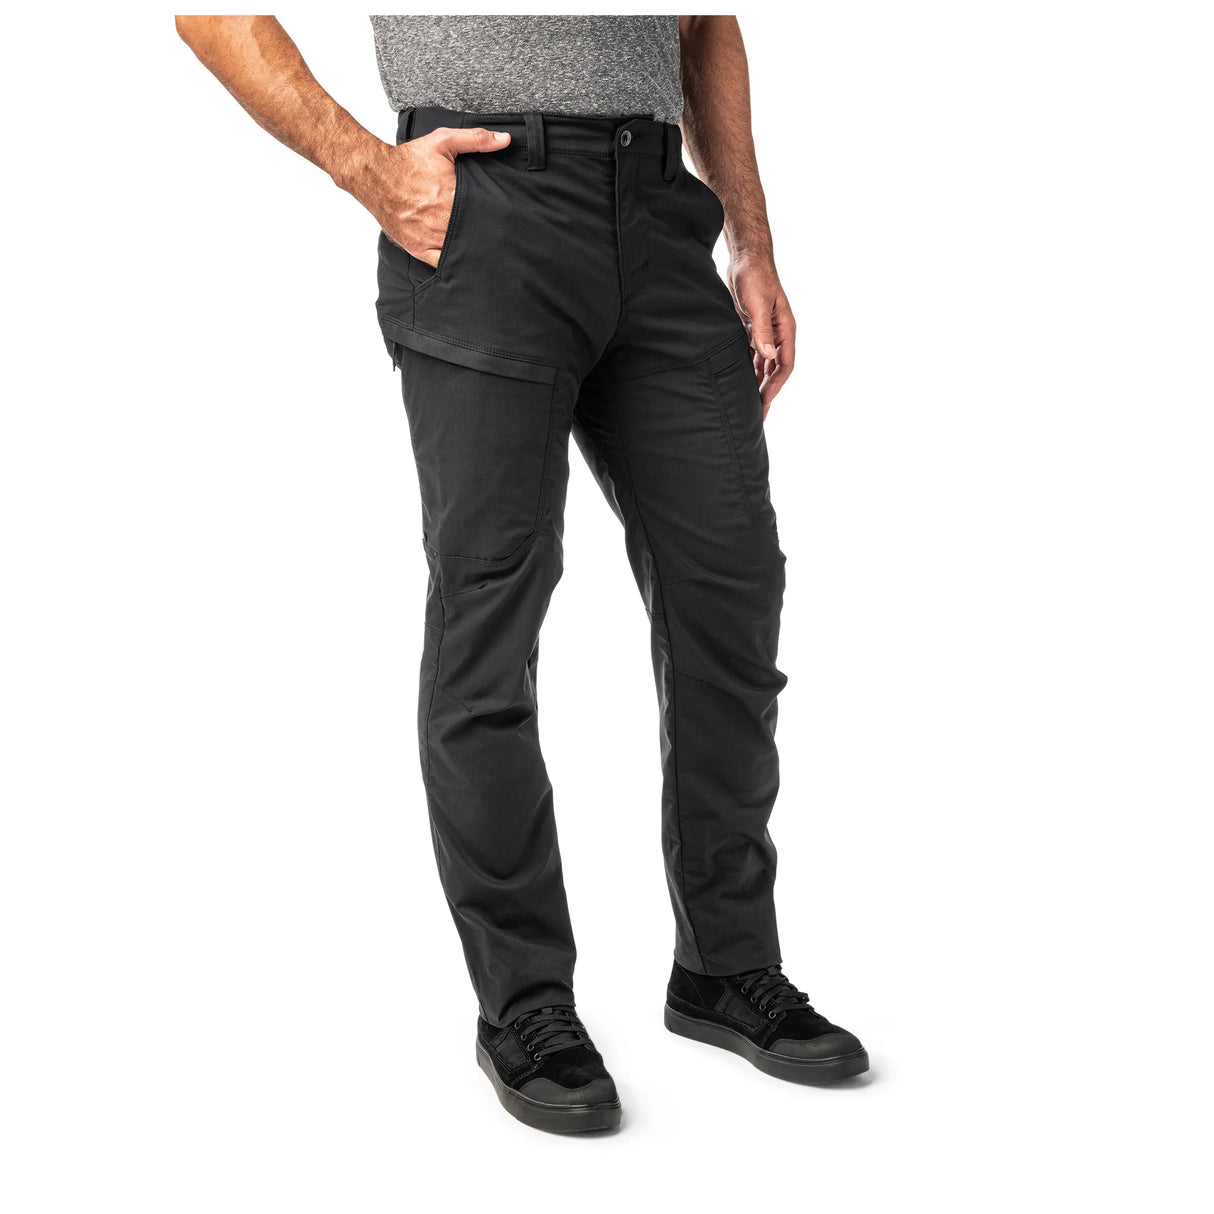 Elastane Plain Weave Pants: Offers a high range of motion and comfortable fit.